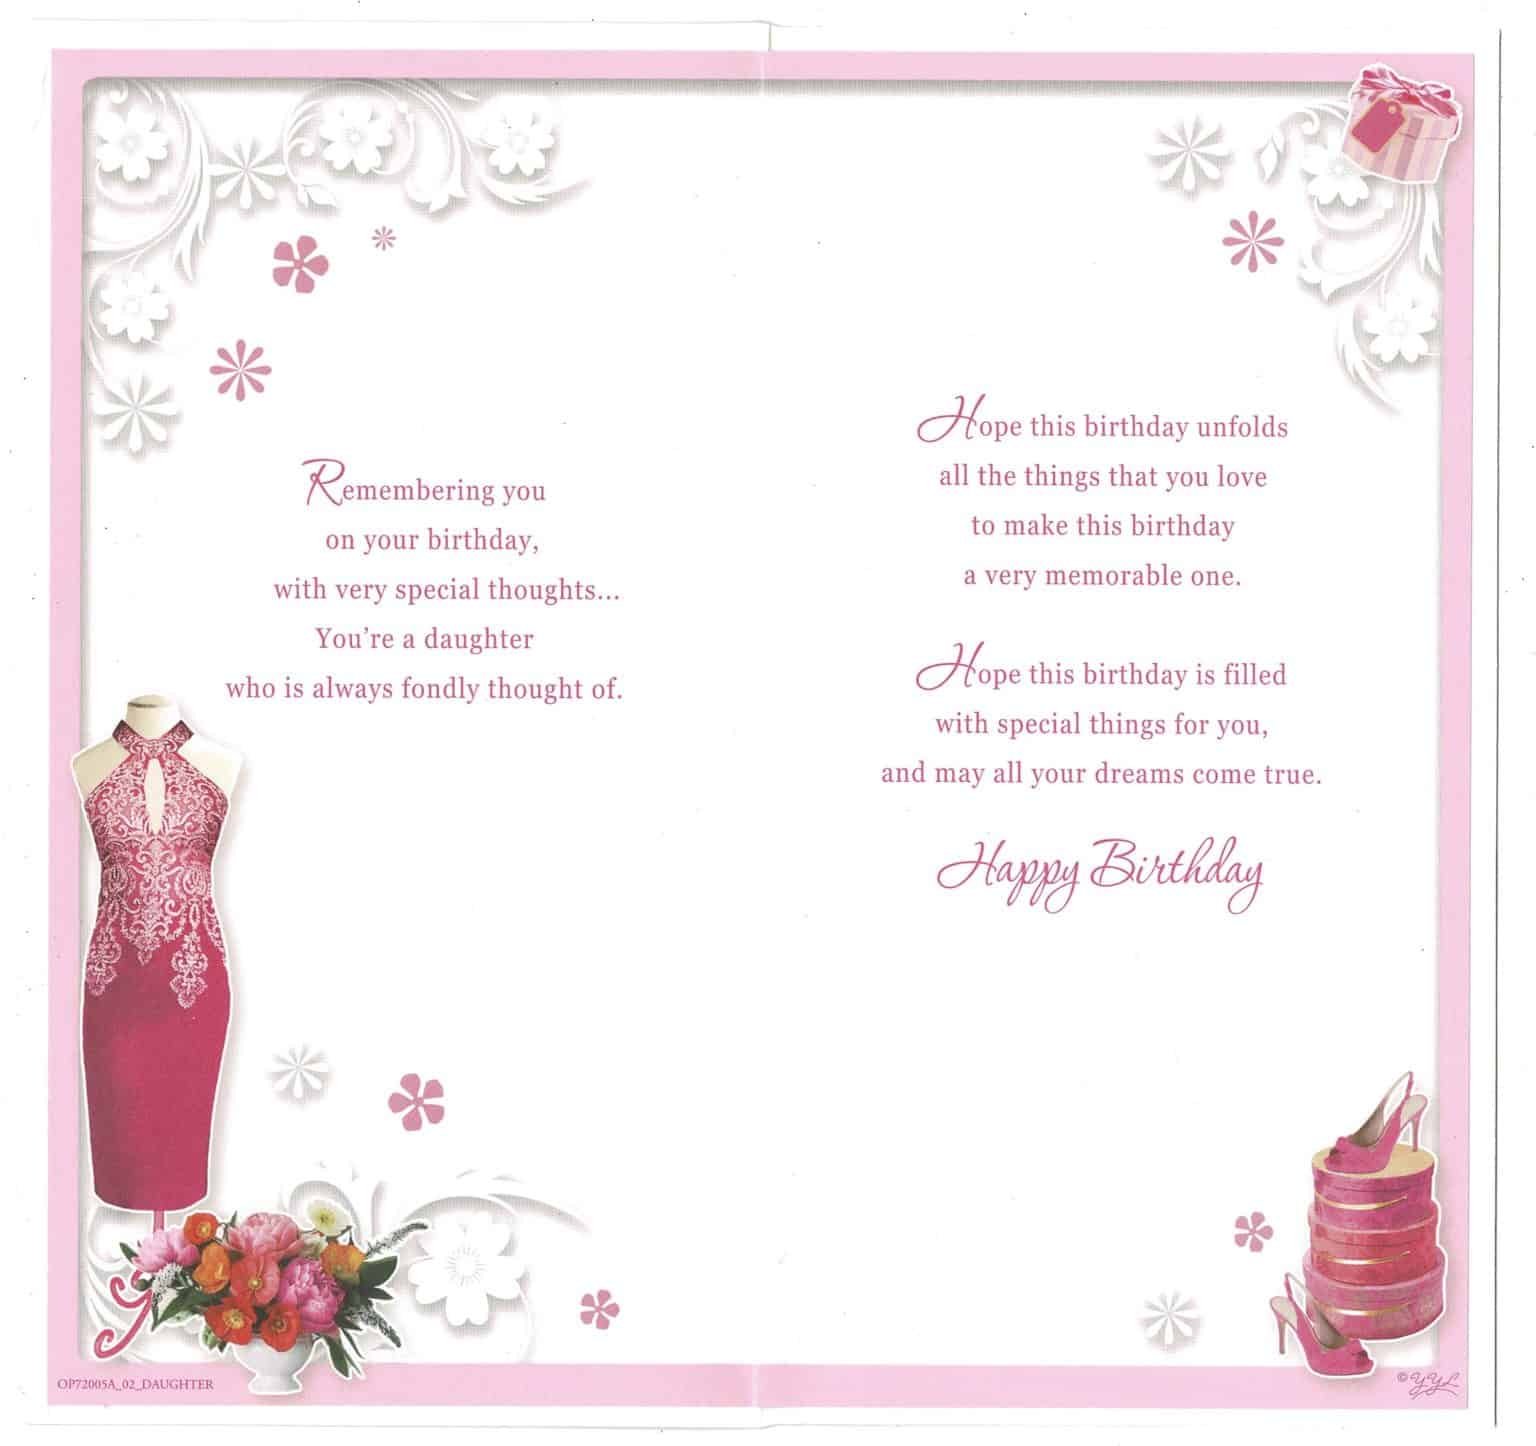 daughter-birthday-card-with-sentiment-verse-birthday-wishes-to-a-dear